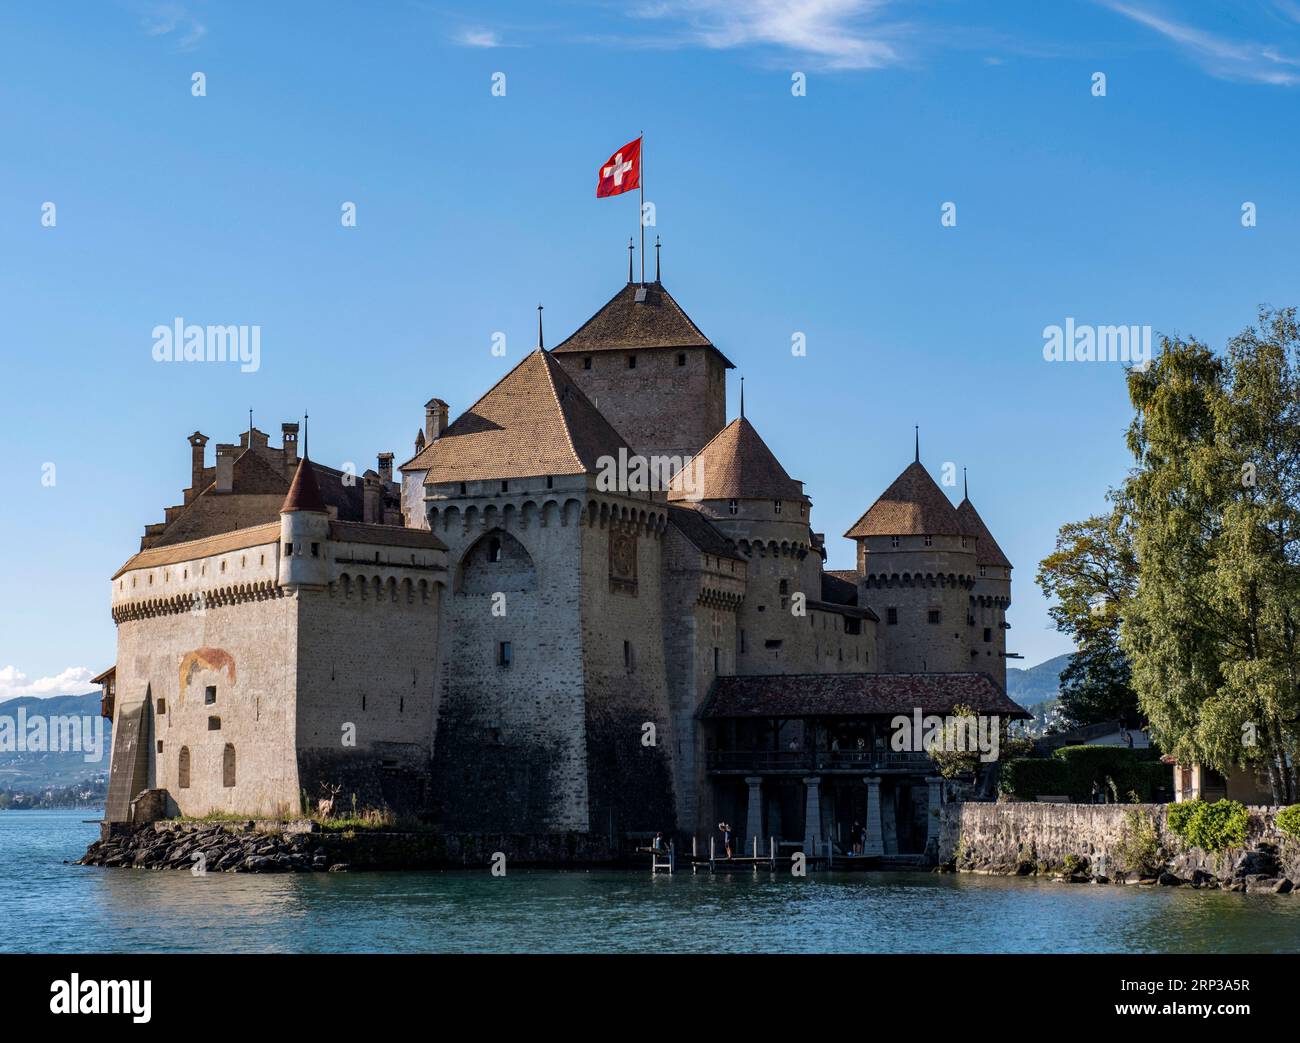 Castle Chillon (Chateau de Chillon) on the shores of Lake Geneva situated between Montreux and Villeneuve in the Canton of Vaud, Switzerland. Stock Photo